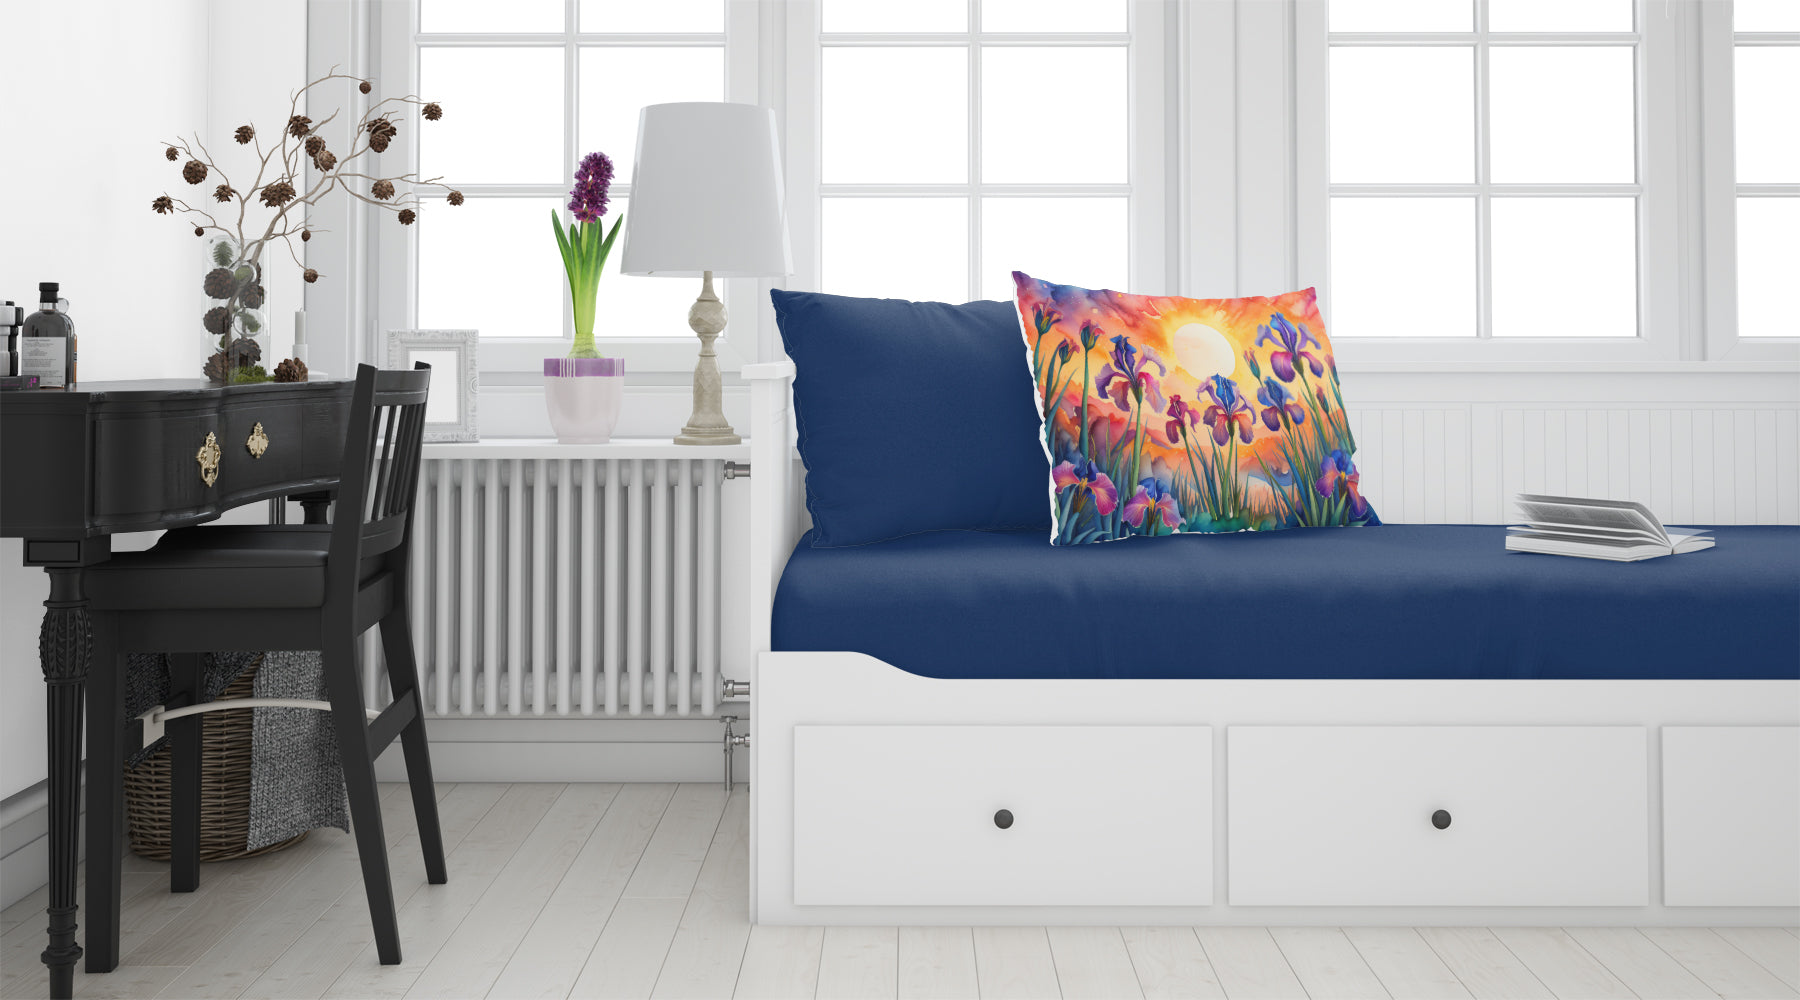 Buy this Iris in Color Fabric Standard Pillowcase